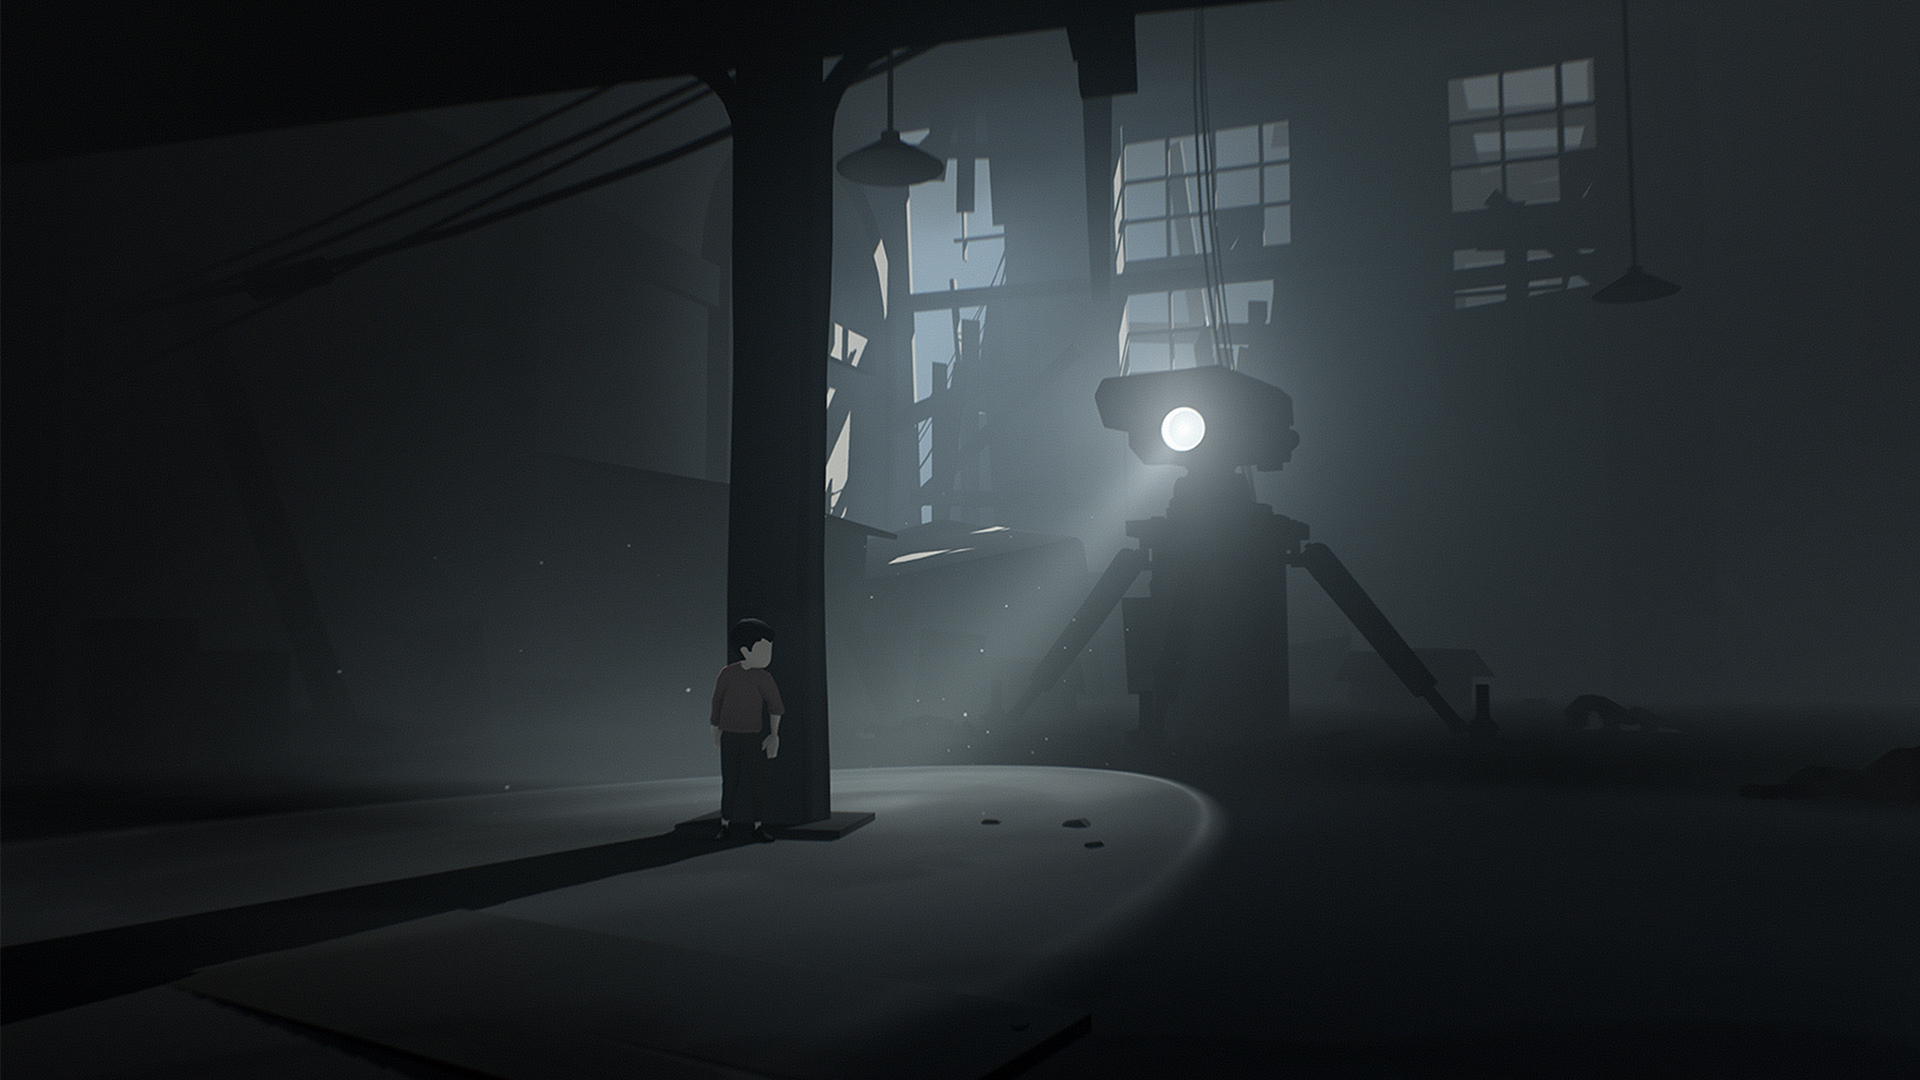 Inside Game Download! Free Download Adventure, Puzzle, Indie and  Atmospheric Video Game!